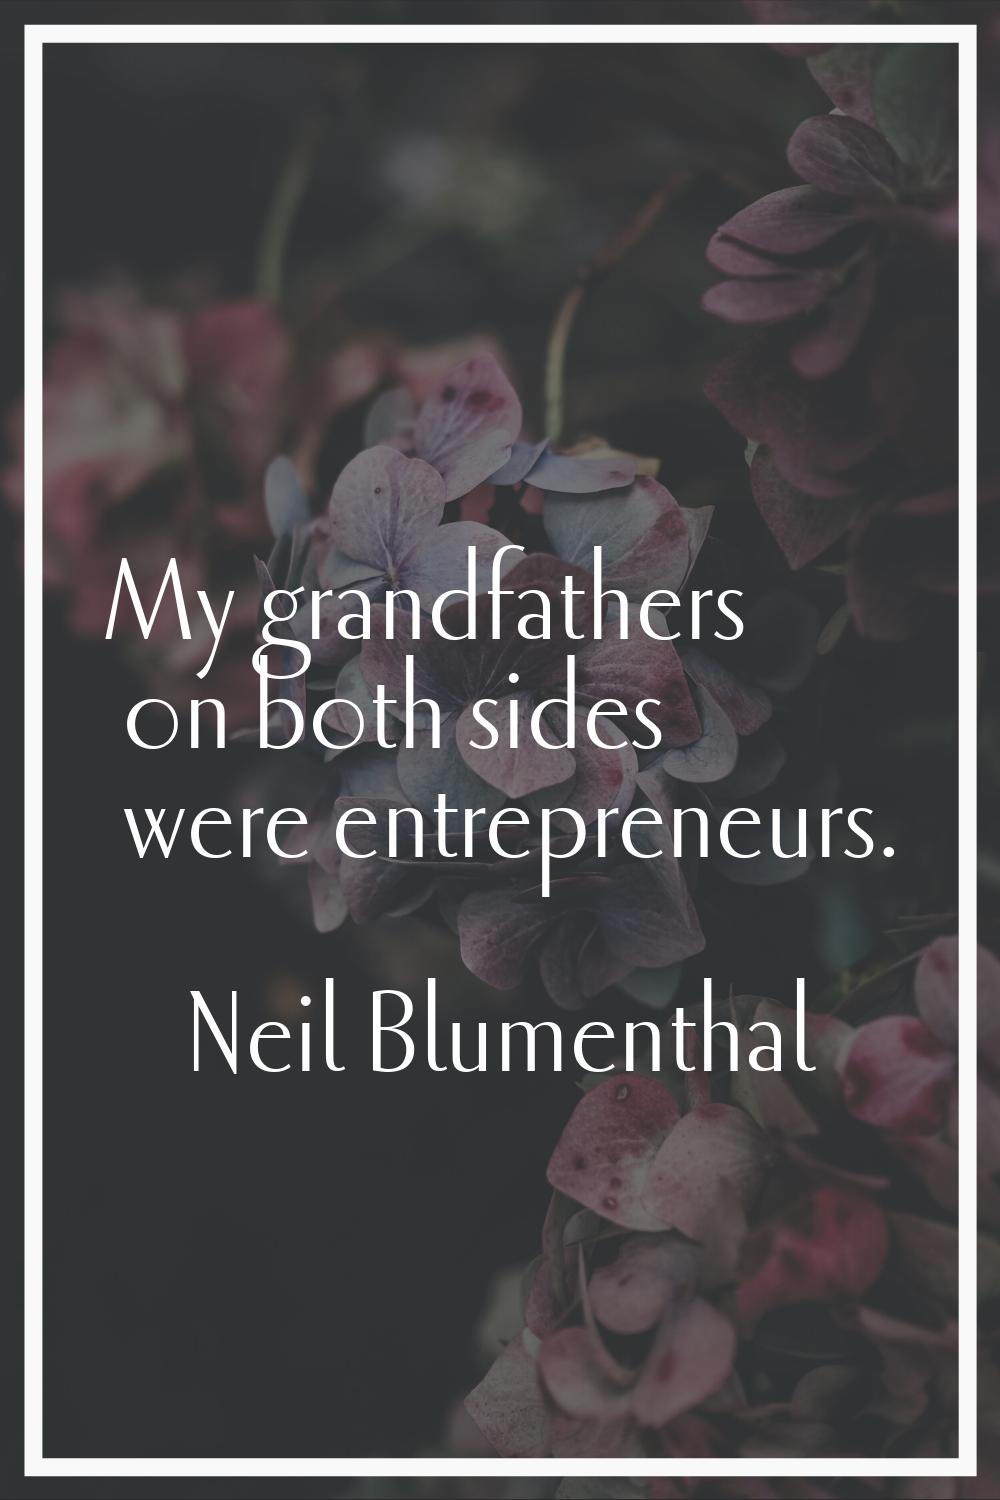 My grandfathers on both sides were entrepreneurs.